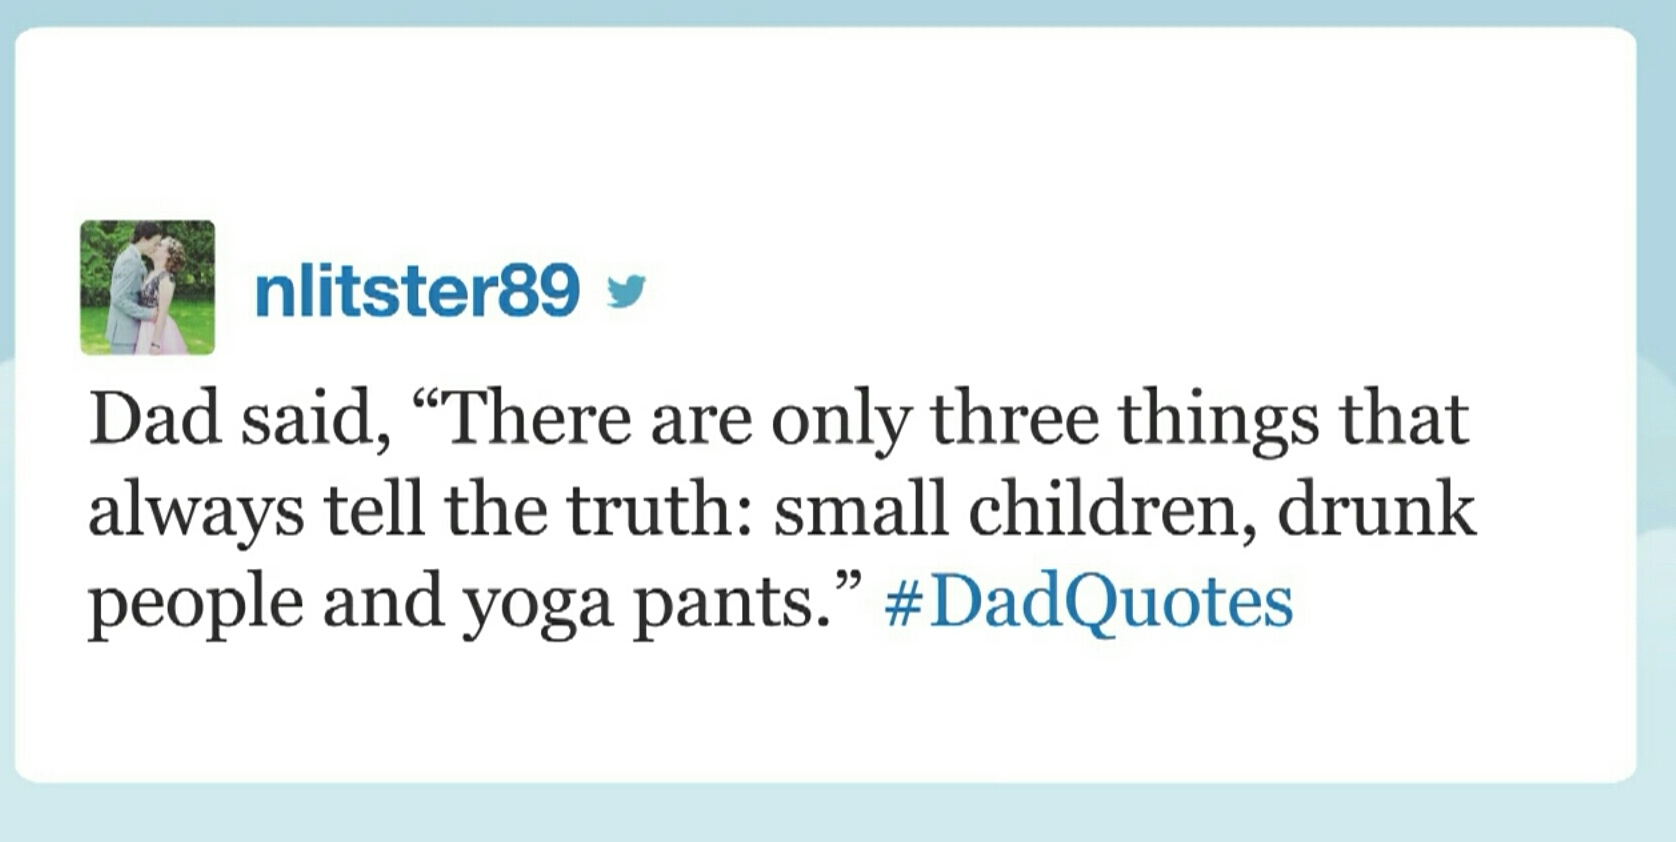 document - 18 nlitster89 Dad said, There are only three things that always tell the truth small children, drunk people and yoga pants.